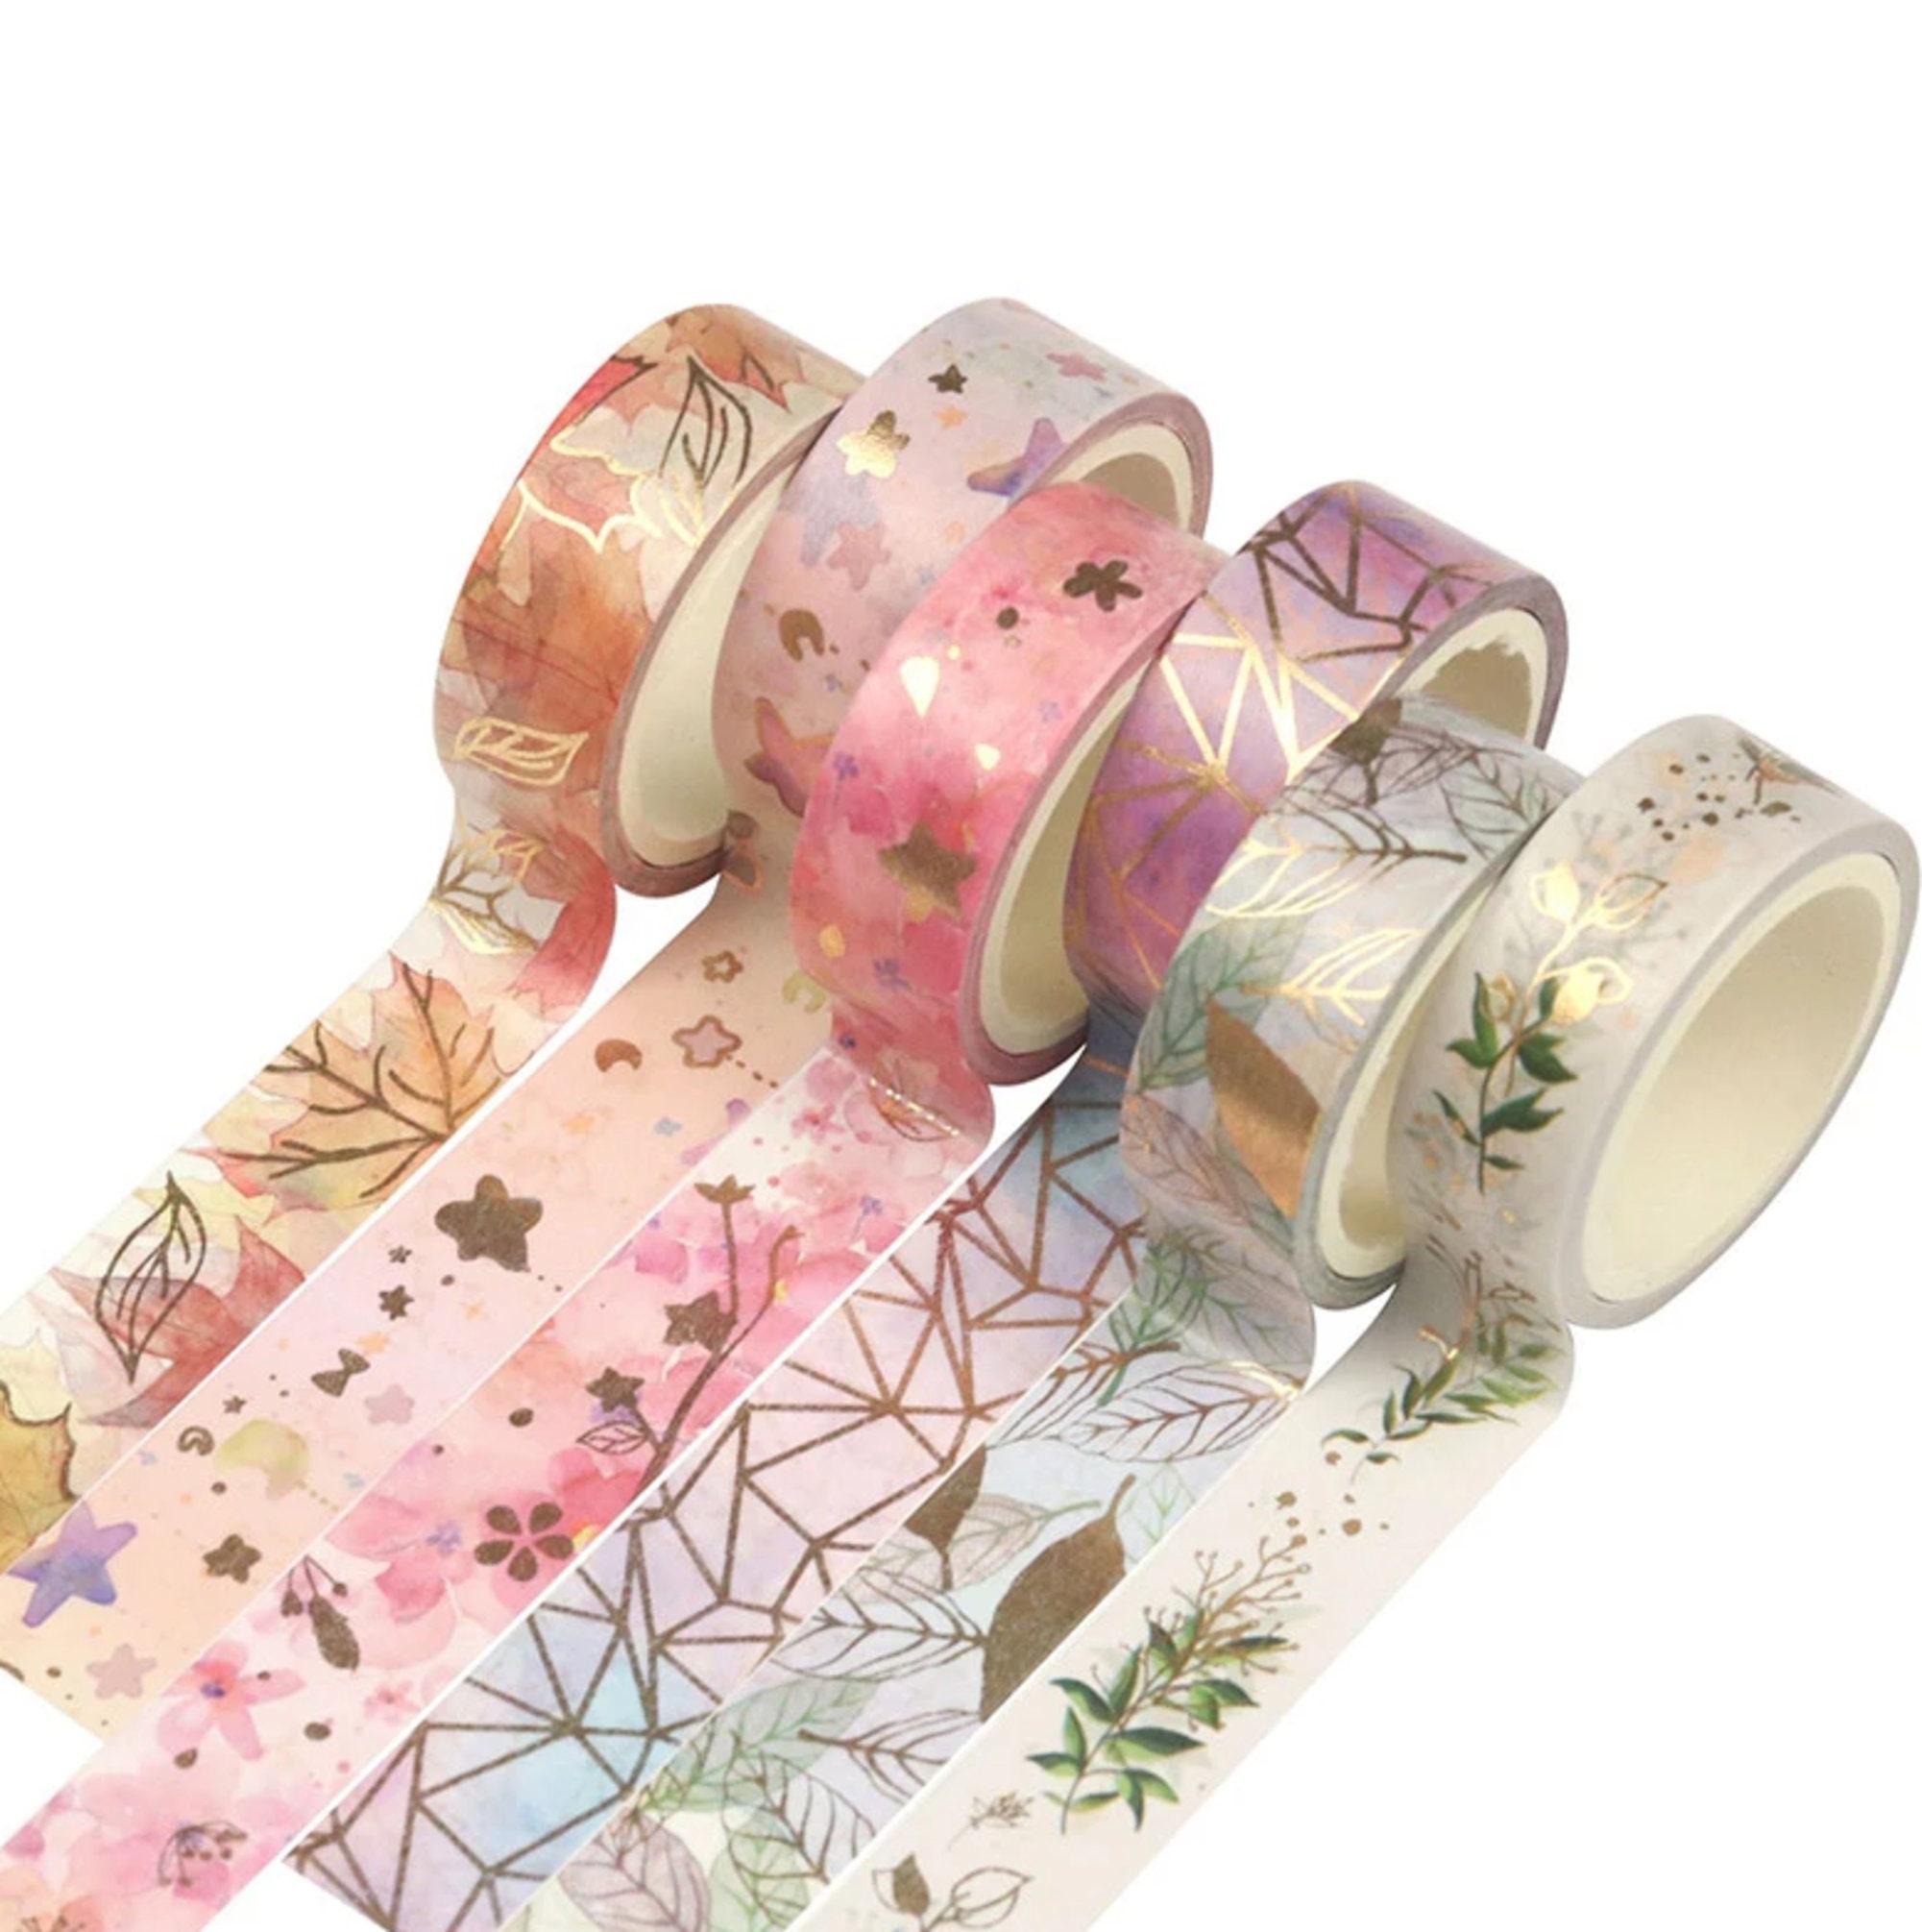 Cartoon Tape Set Decorative Adhesive Tape for Crafts,Beautify Bullet Journals,Planners 30 Rolls. 